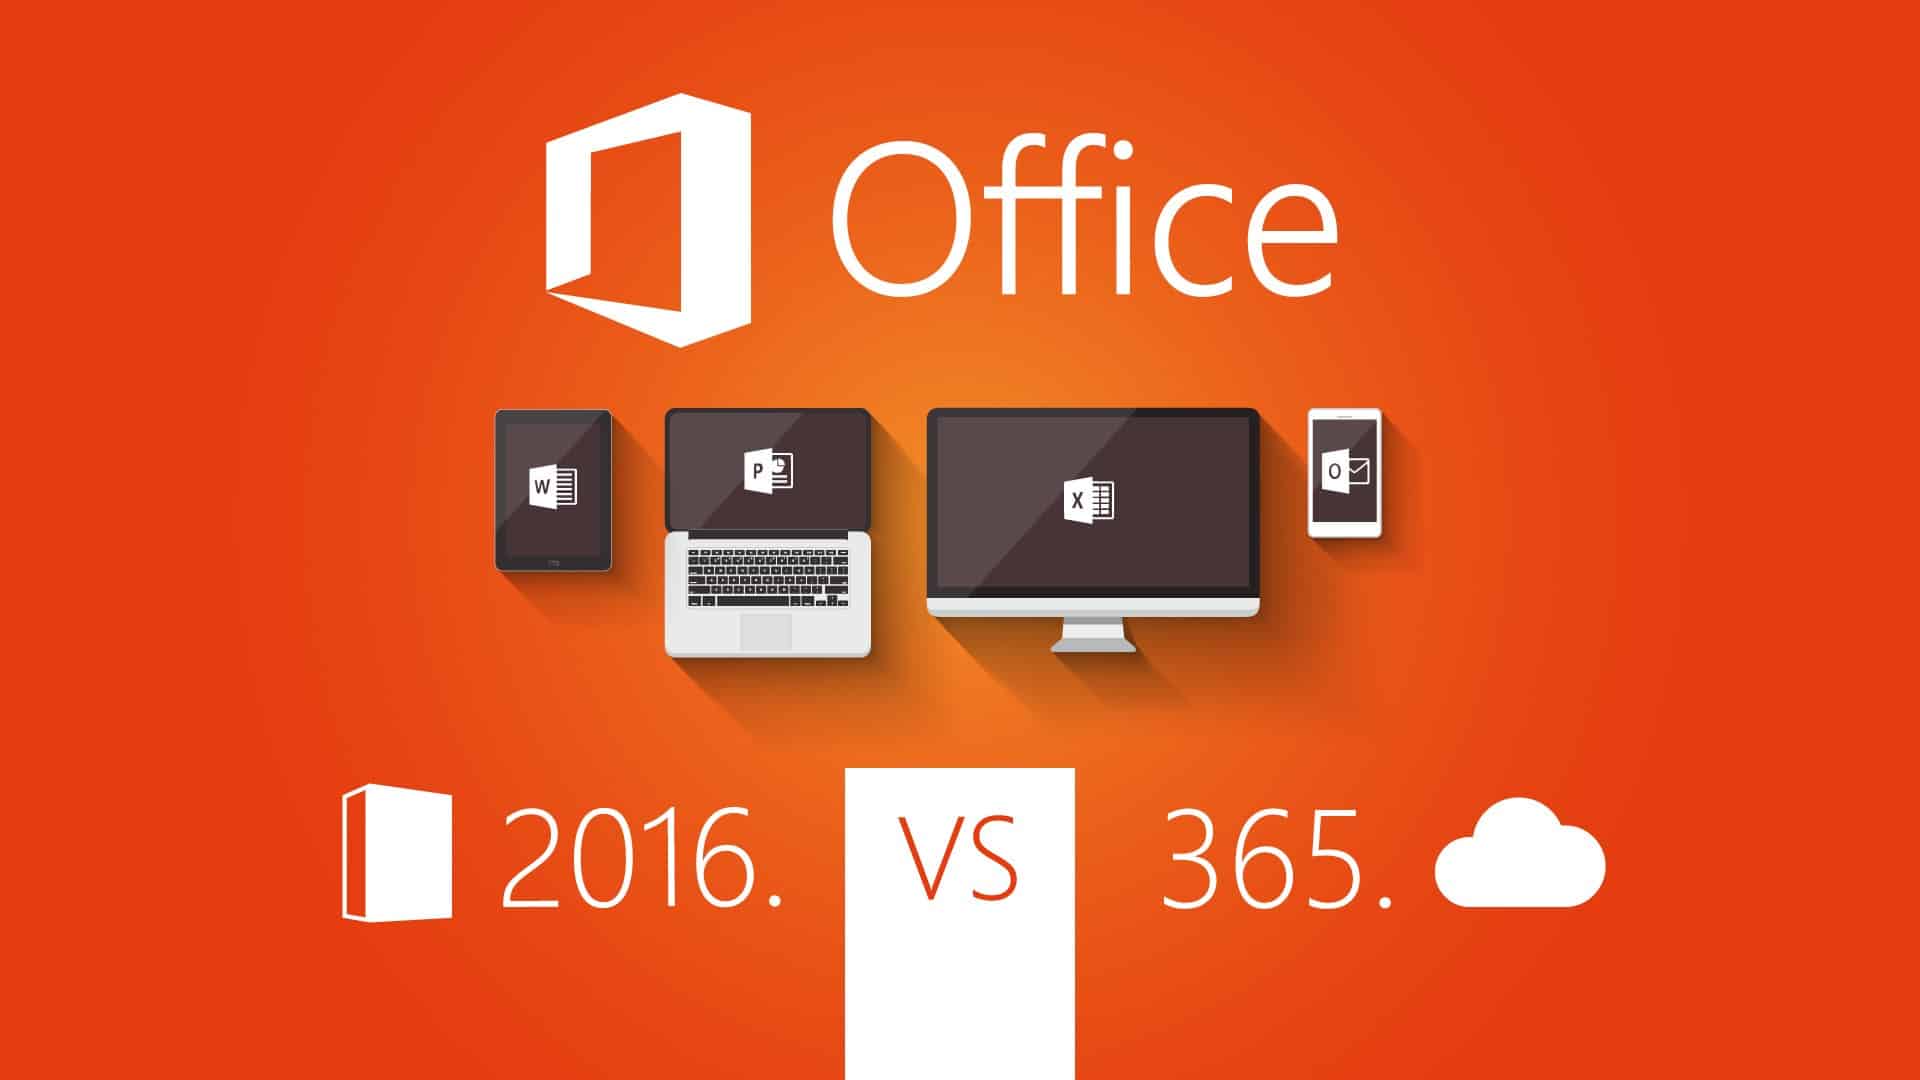 Microsoft Office 2016 vs Office 365: Which One is Better for you?